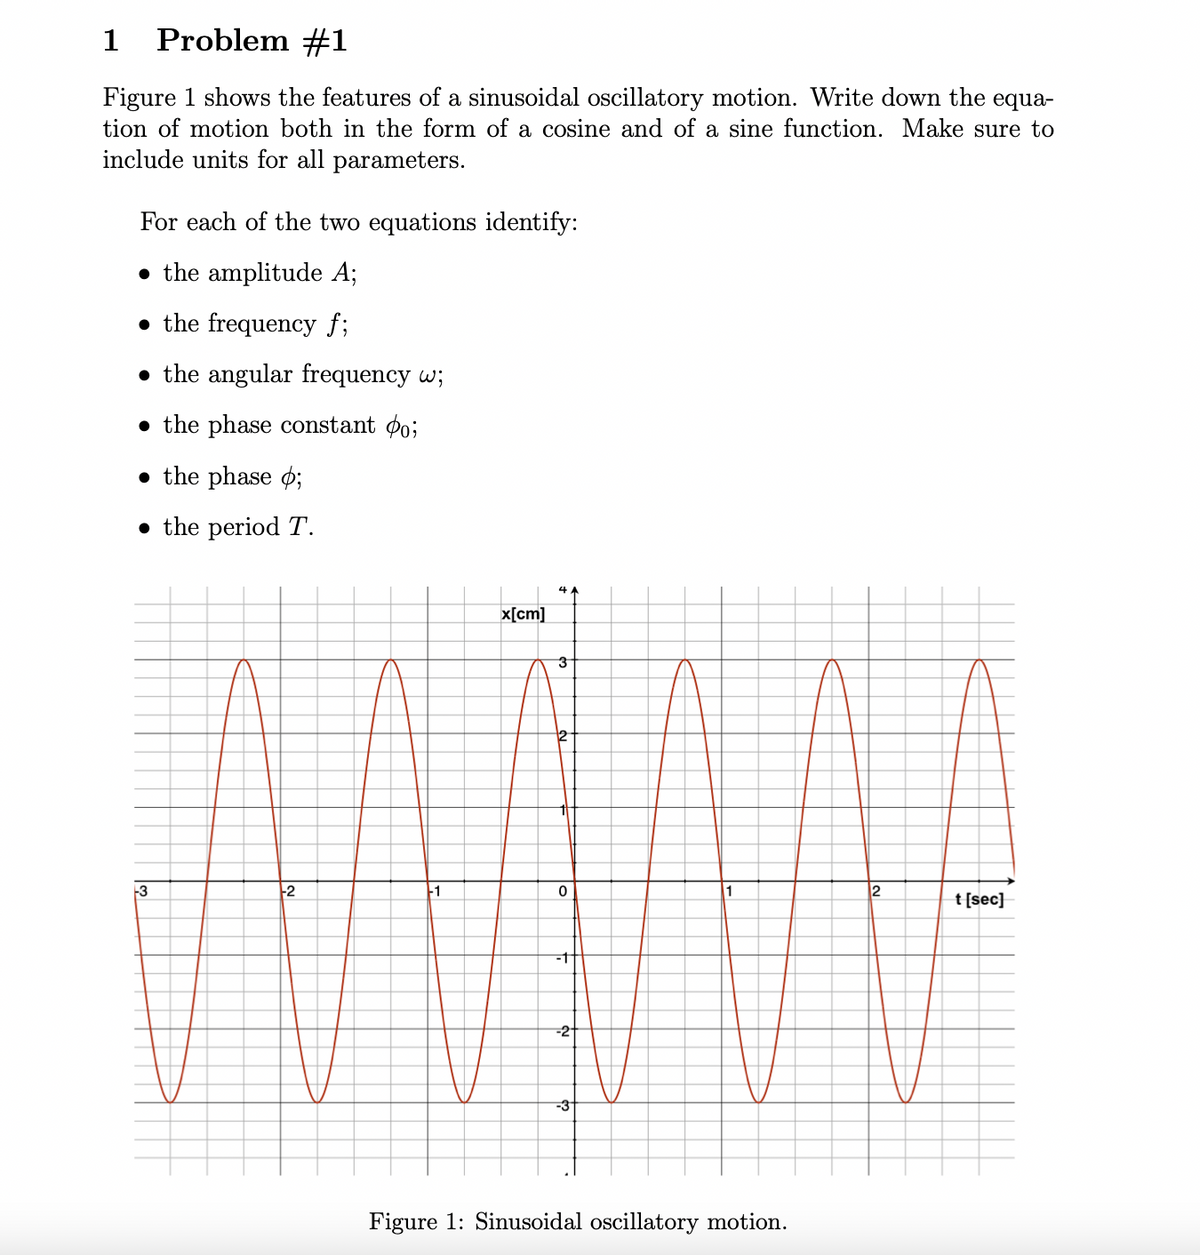 1
Problem #1
Figure 1 shows the features of a sinusoidal oscillatory motion. Write down the
equa-
tion of motion both in the form of a cosine and of a sine function. Make sure to
include units for all parameters.
For each of the two equations identify:
• the amplitude A;
• the frequency f;
• the angular frequency w;
• the phase constant po;
• the phase o;
• the period T.
4 A
x[cm]
3
12
3
2
-1
1
t[sec}
-t
-2
-3
Figure 1: Sinusoidal oscillatory motion.
